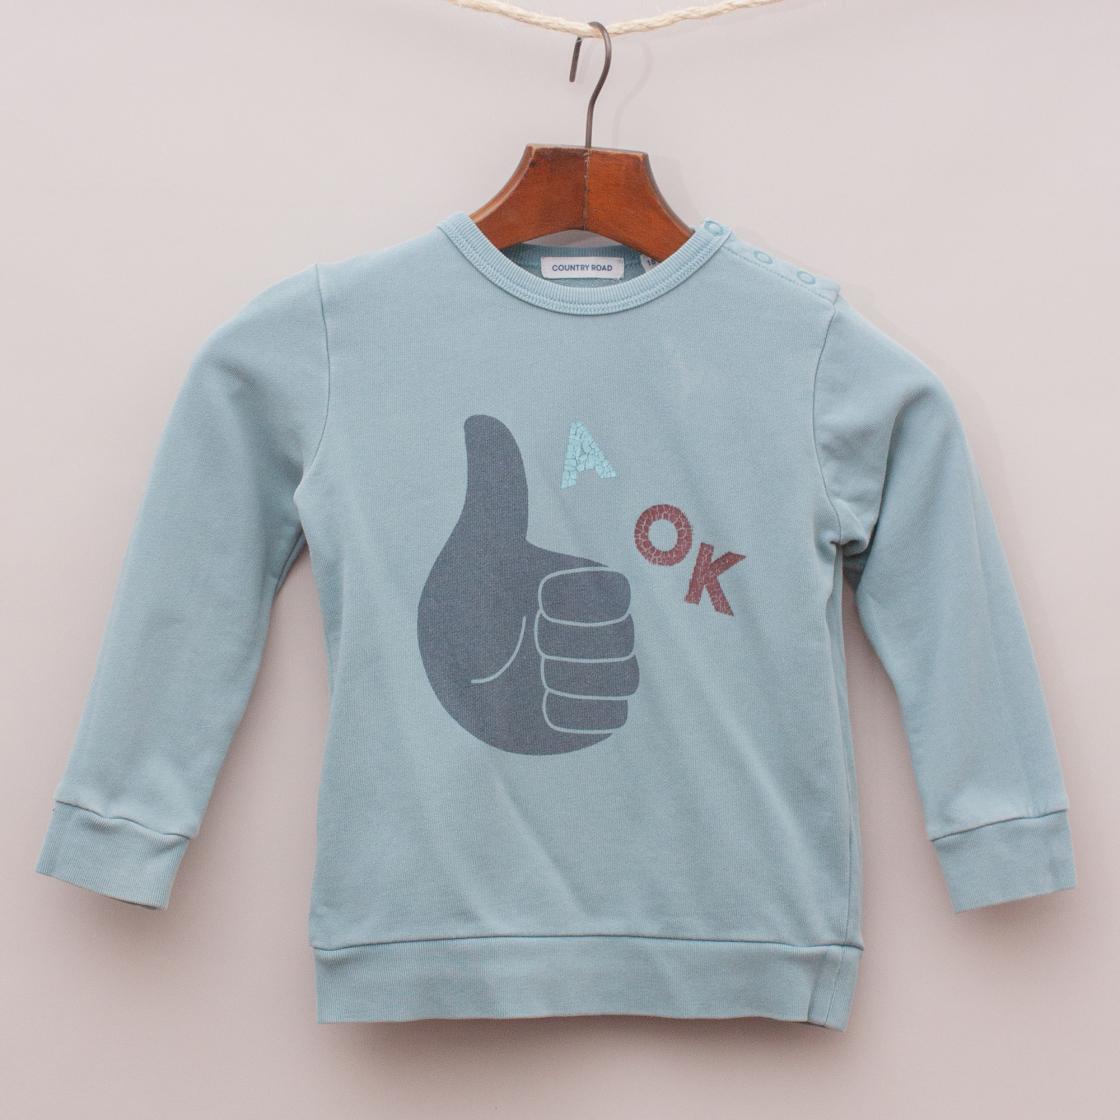 Country Road 'A Ok' Jumper